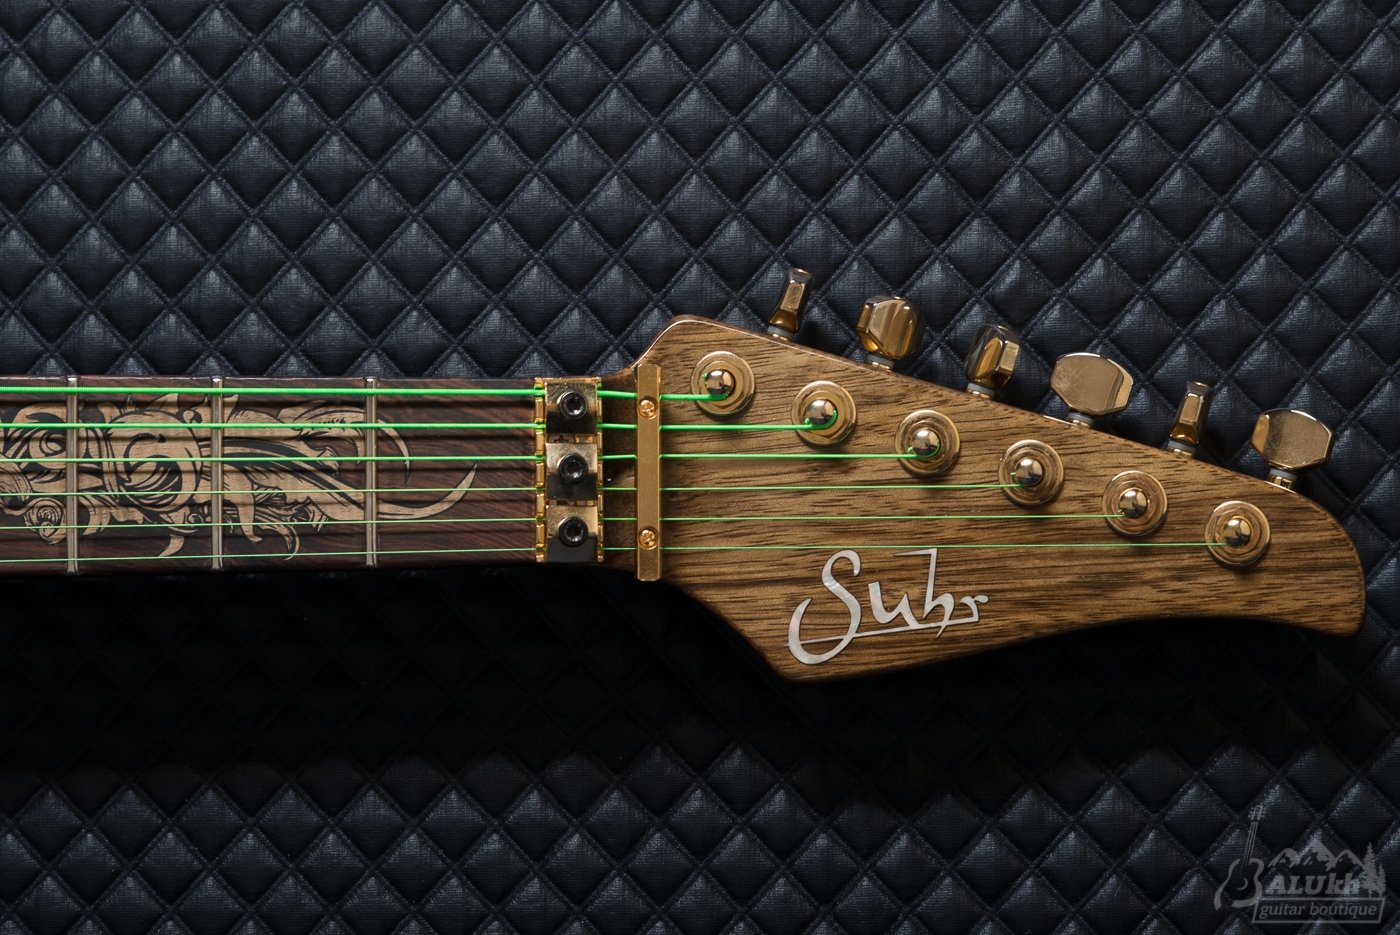 SUHR – The 2013 collection #1